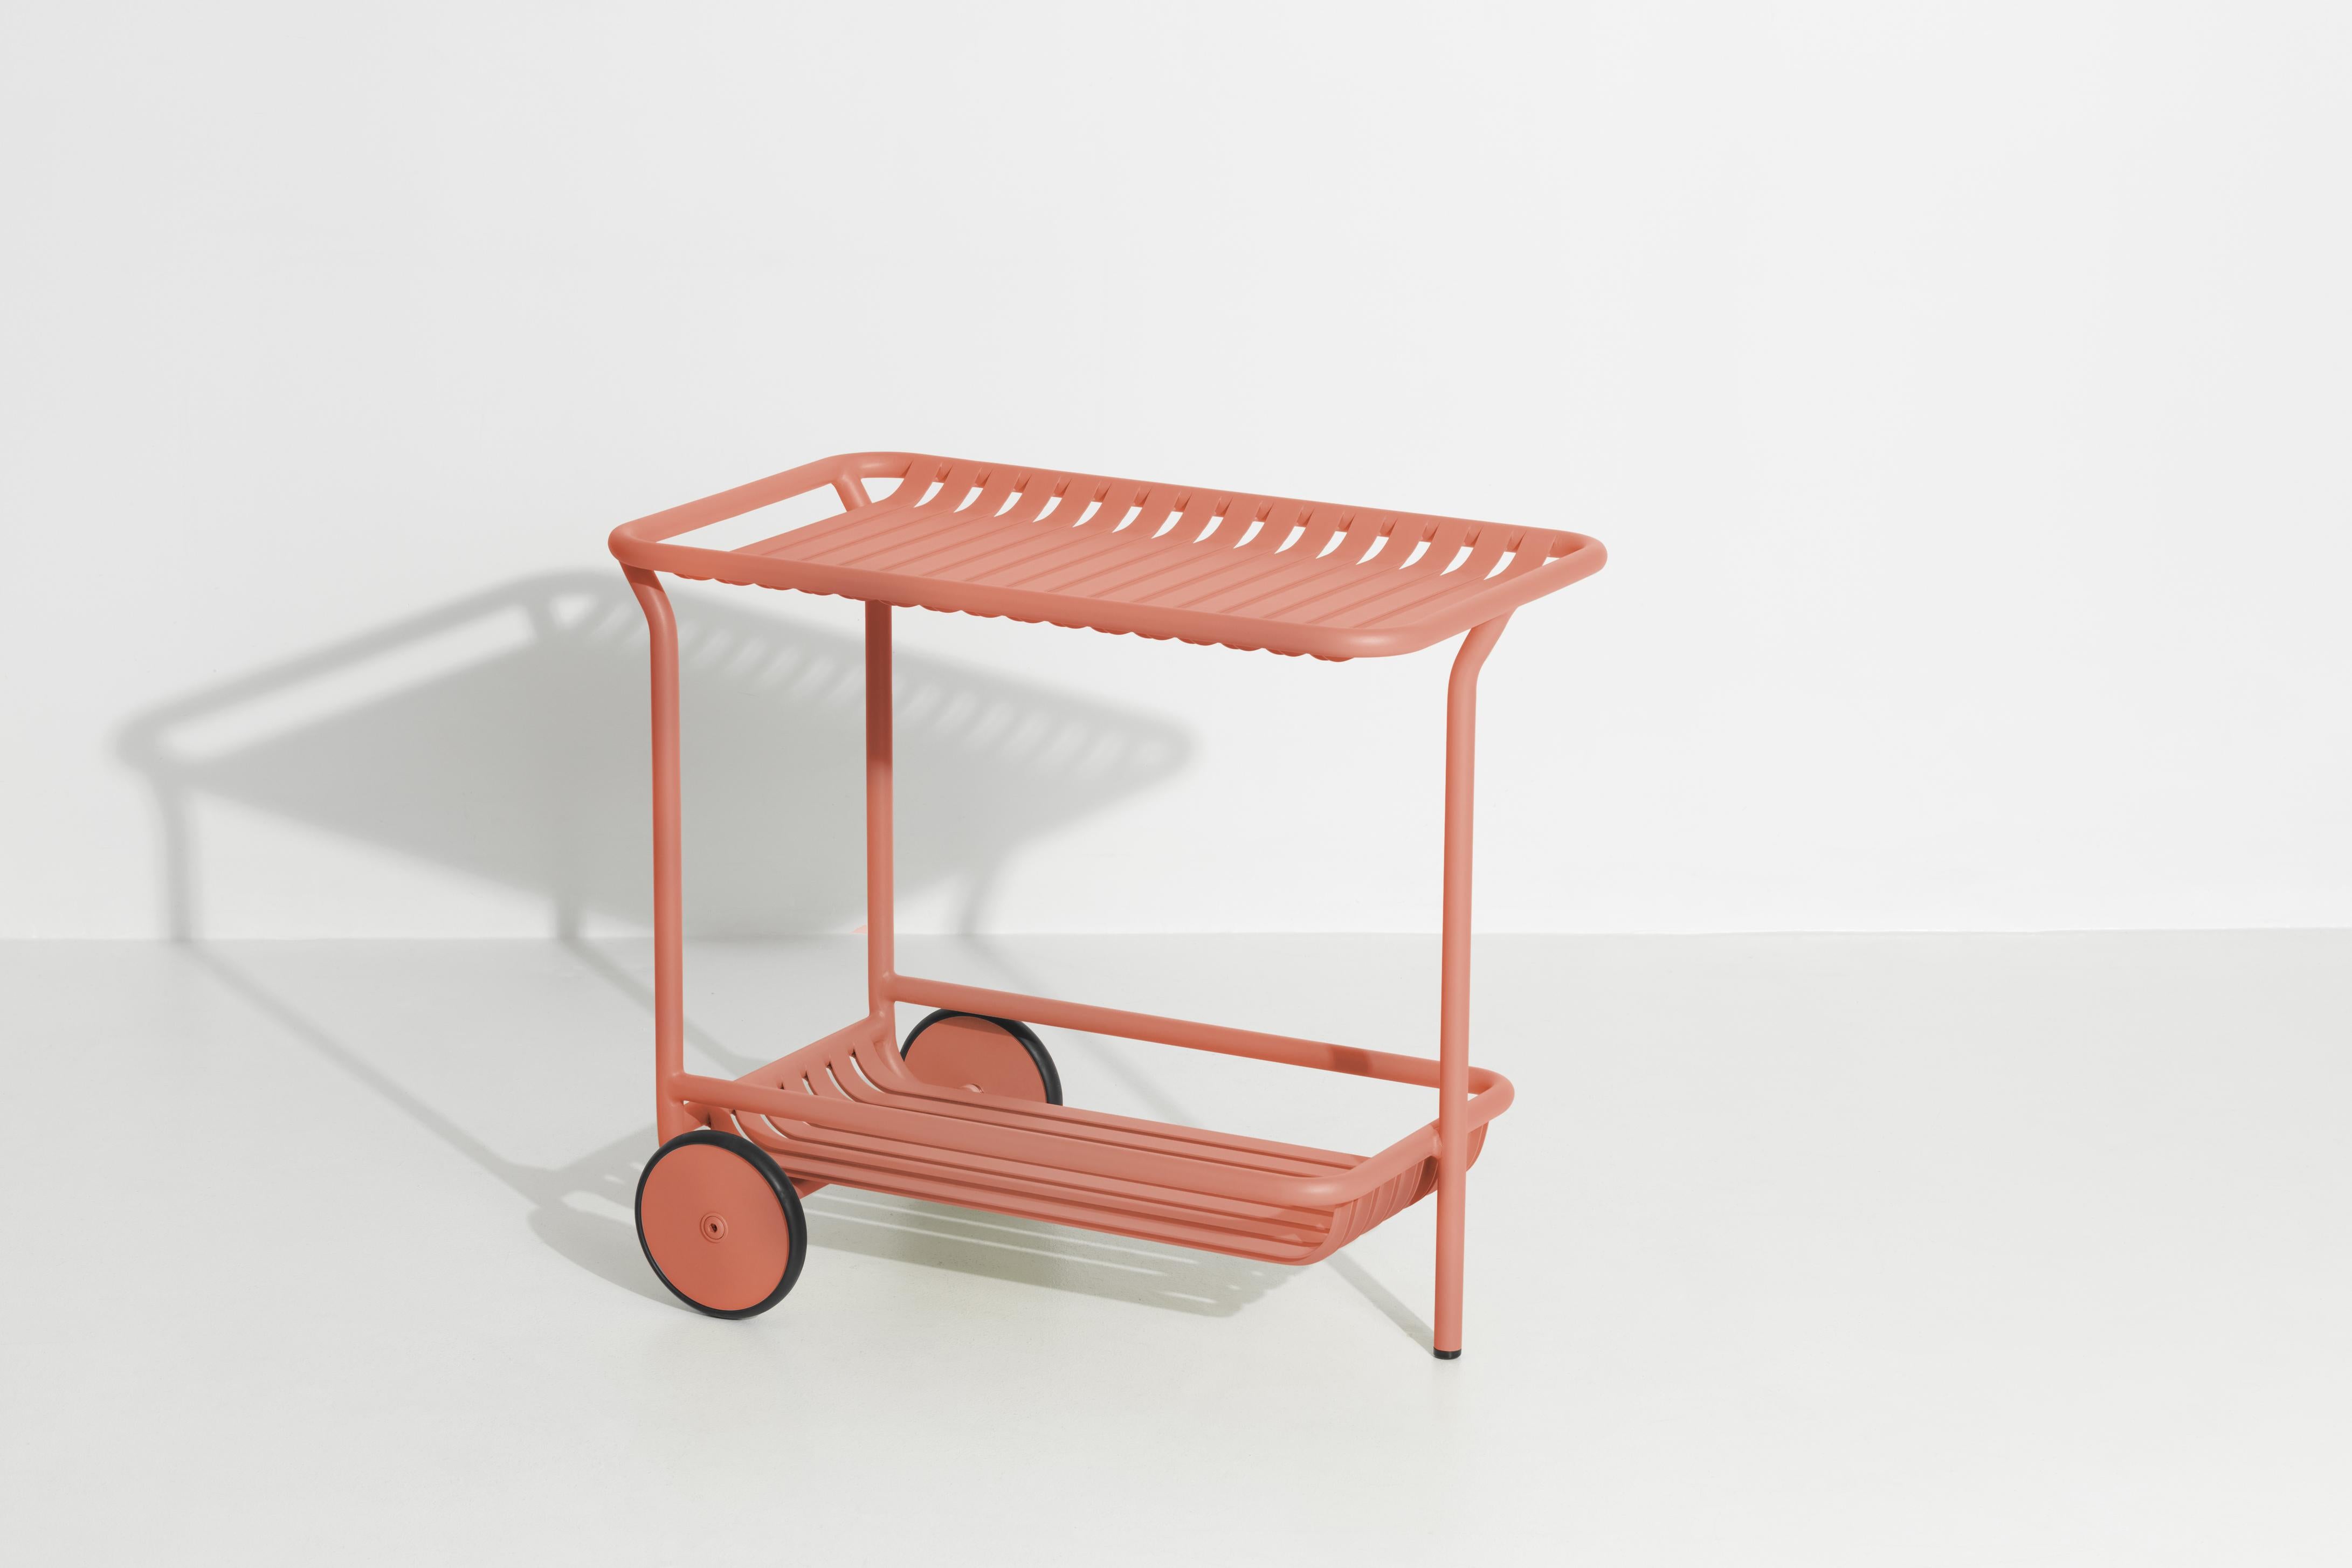 Petite Friture Week-End Trolley in Coral Aluminium by Studio BrichetZiegler, 2017

The week-end collection is a full range of outdoor furniture, in aluminium grained epoxy paint, matt finish, that includes 18 functions and 8 colours for the retail